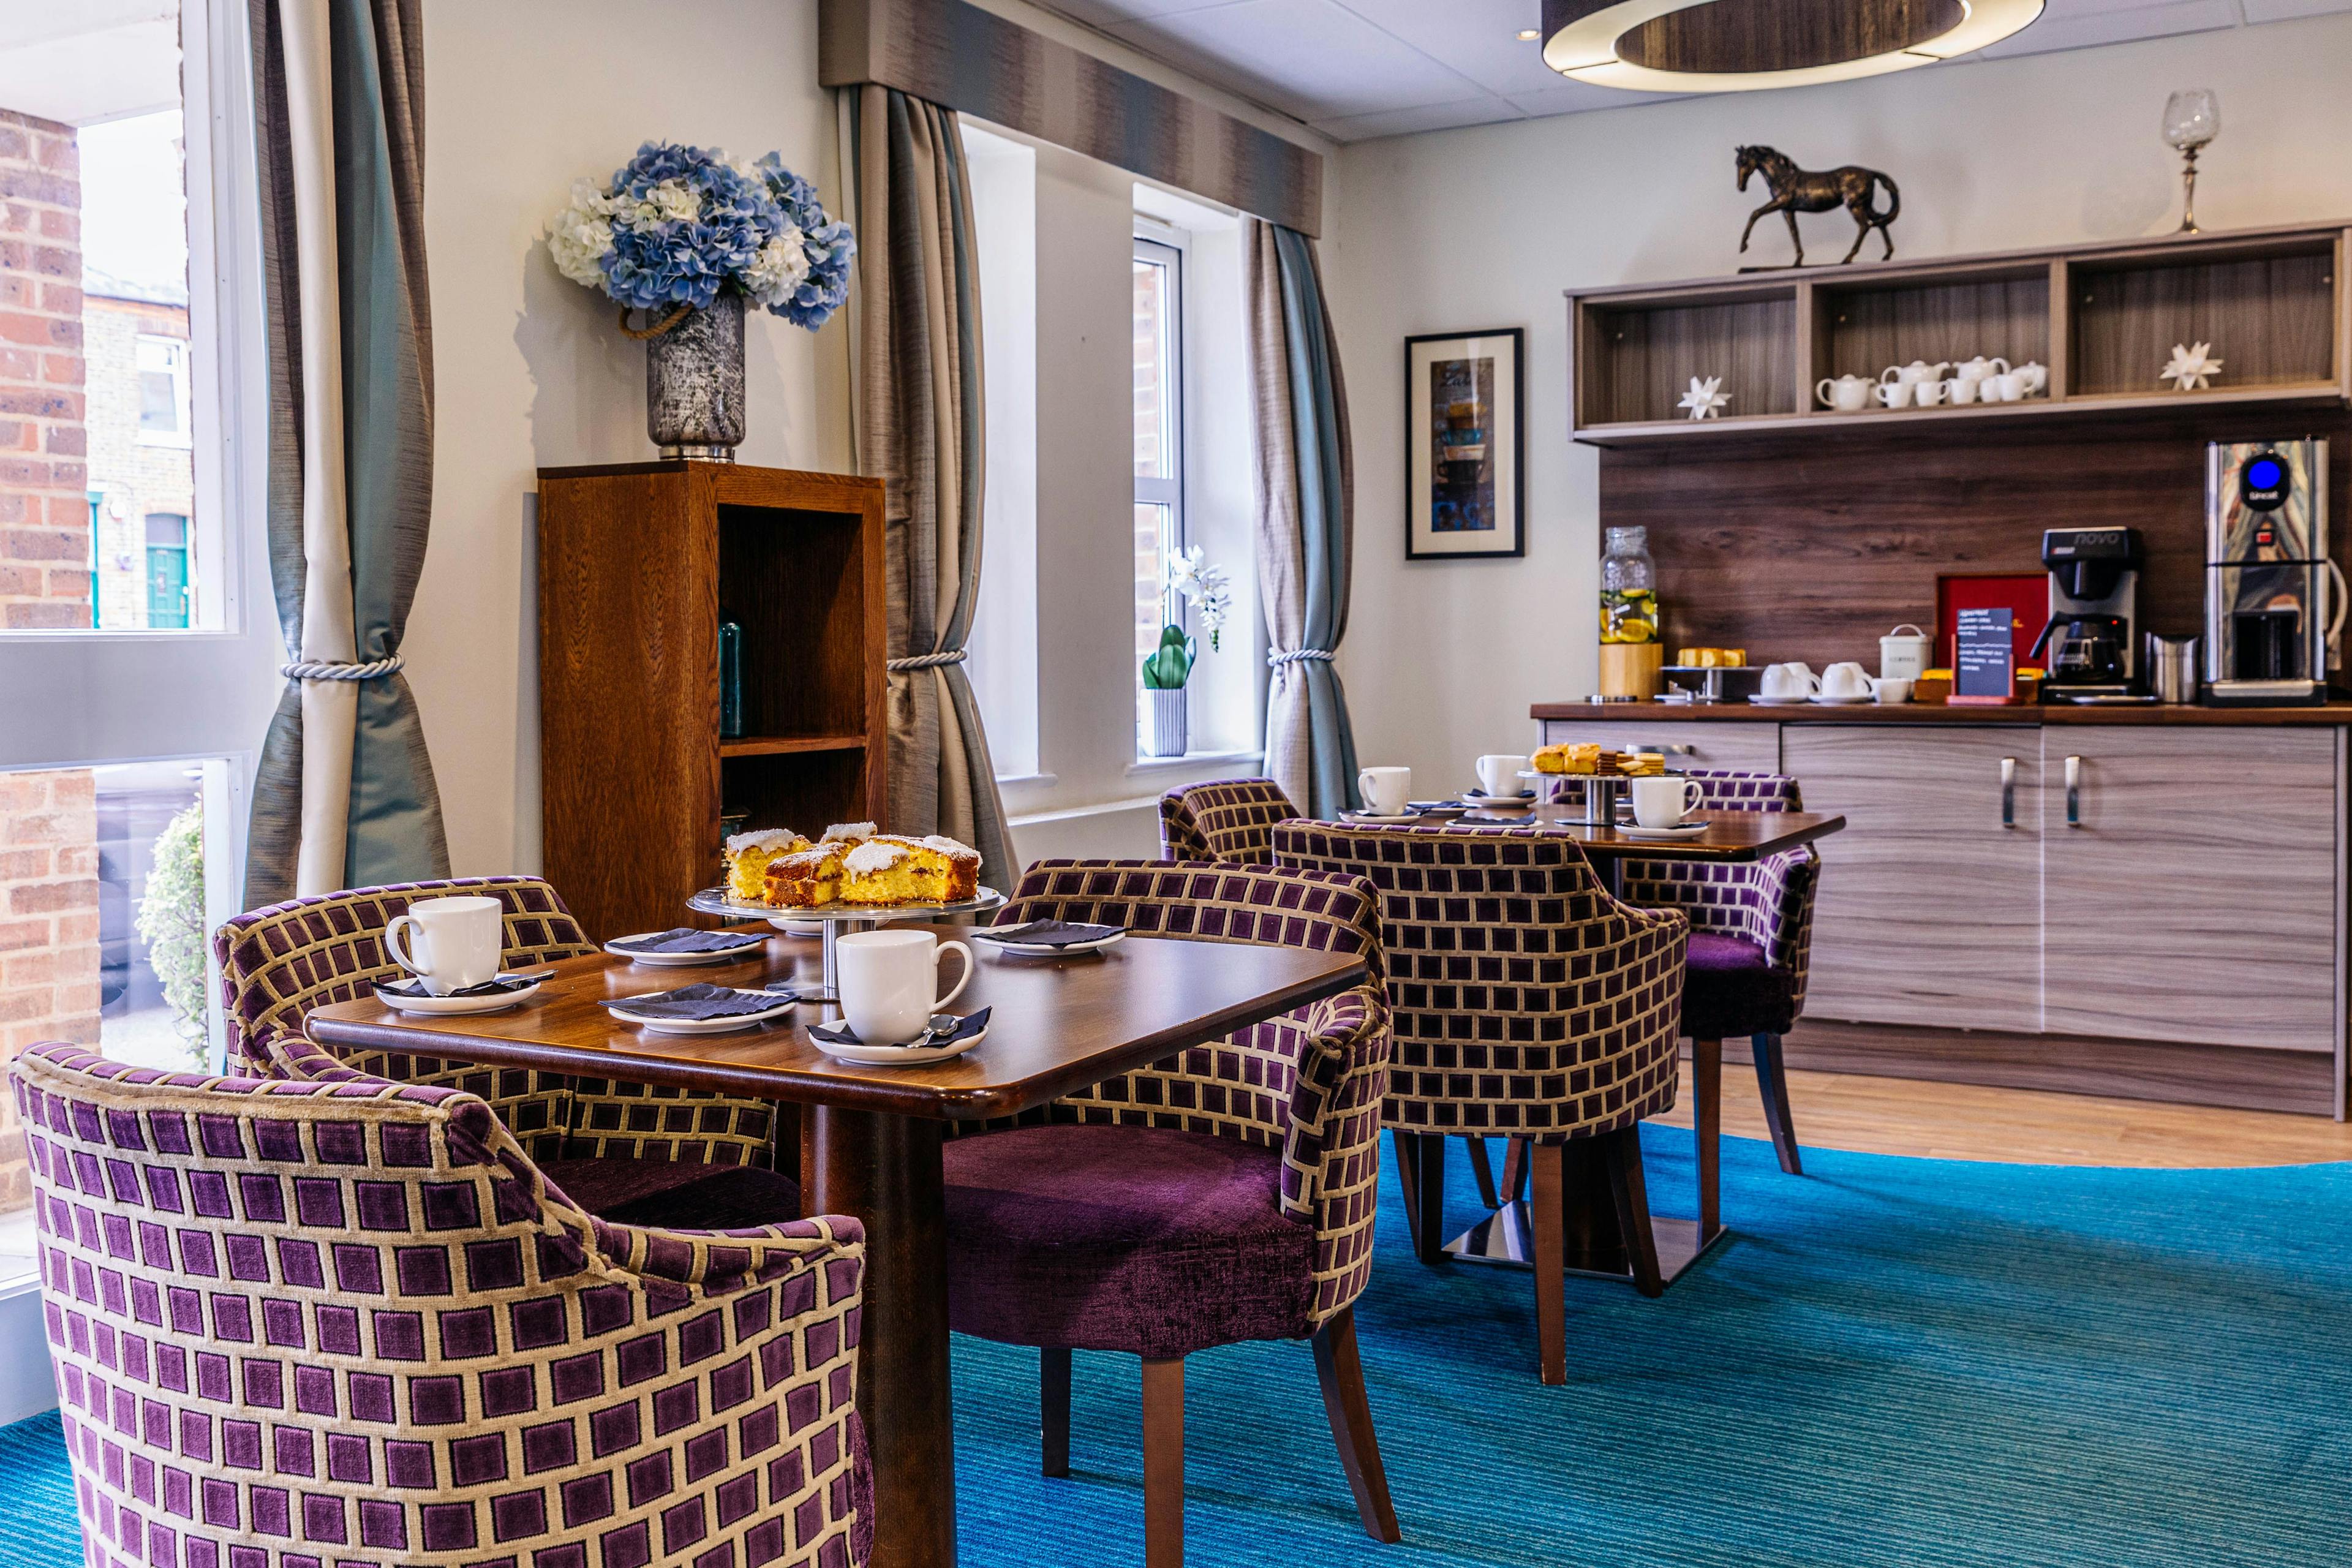 Cafe at Magnolia Court Care Home in London, England